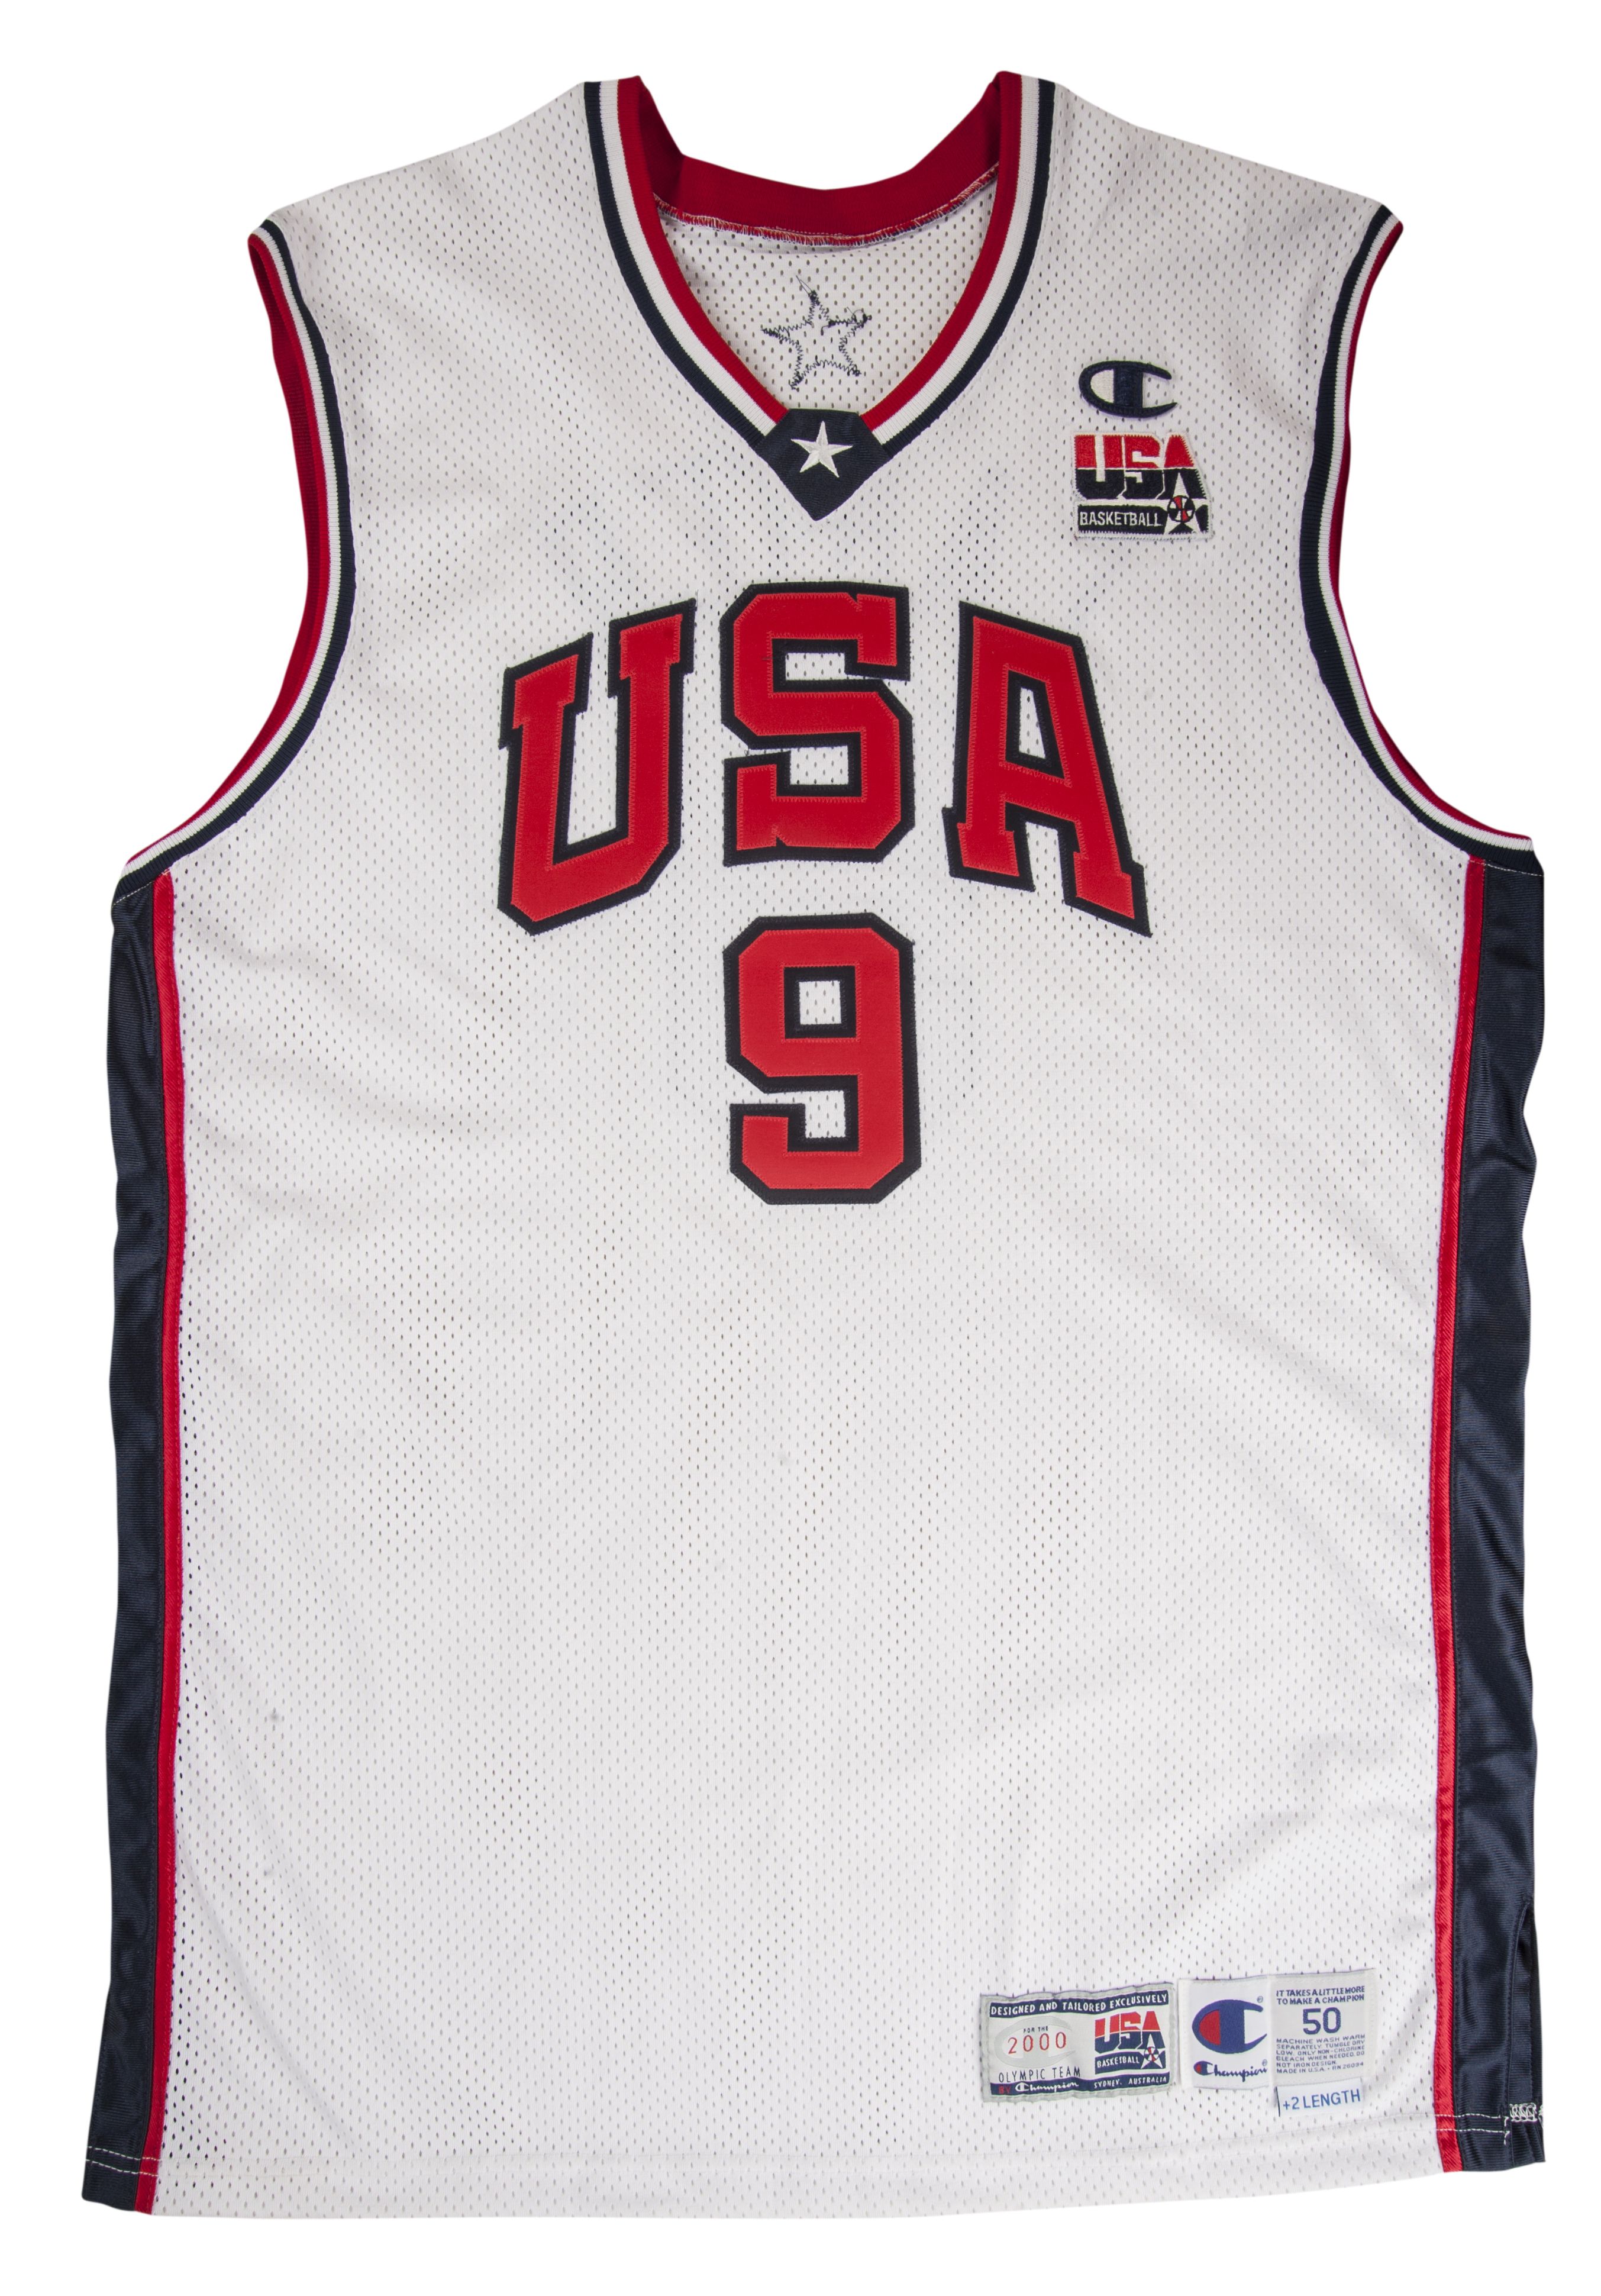 vince carter olympic jersey